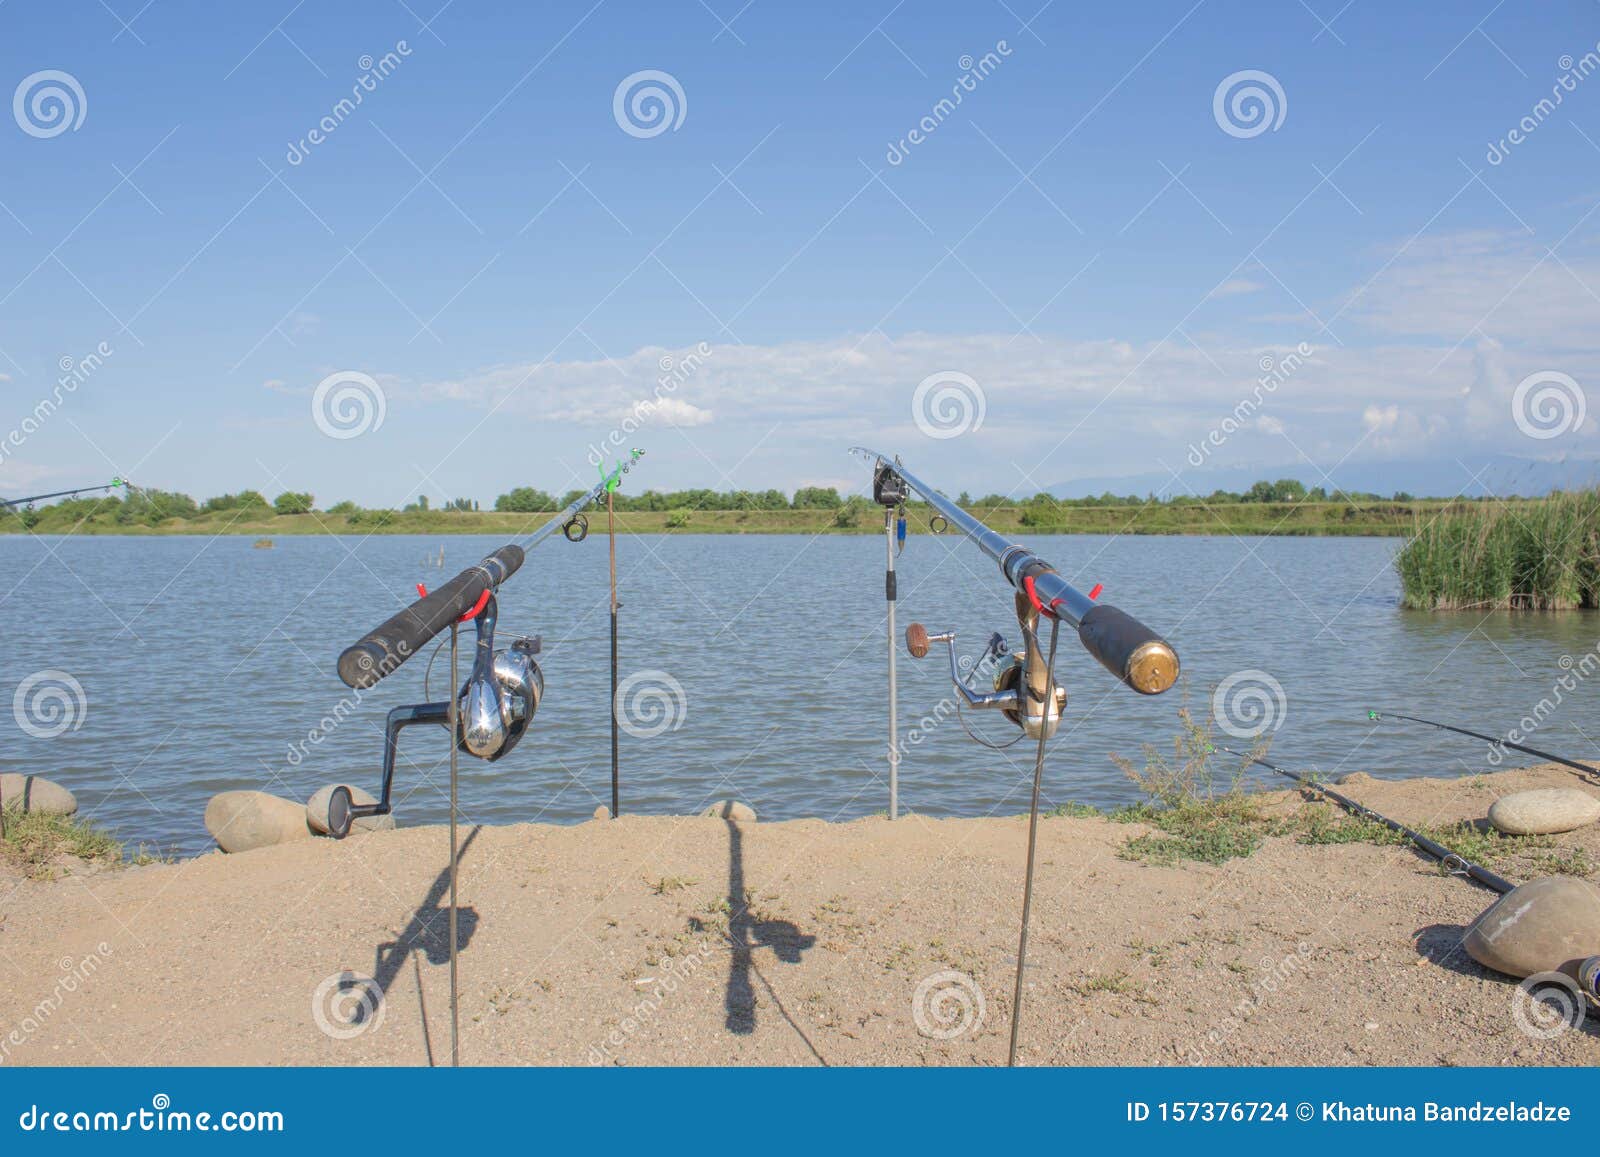 Fishing Reel on the Rod. Fishing Rods Held in Fishing Rod Holders Stock  Photo - Image of landscape, lake: 157376724